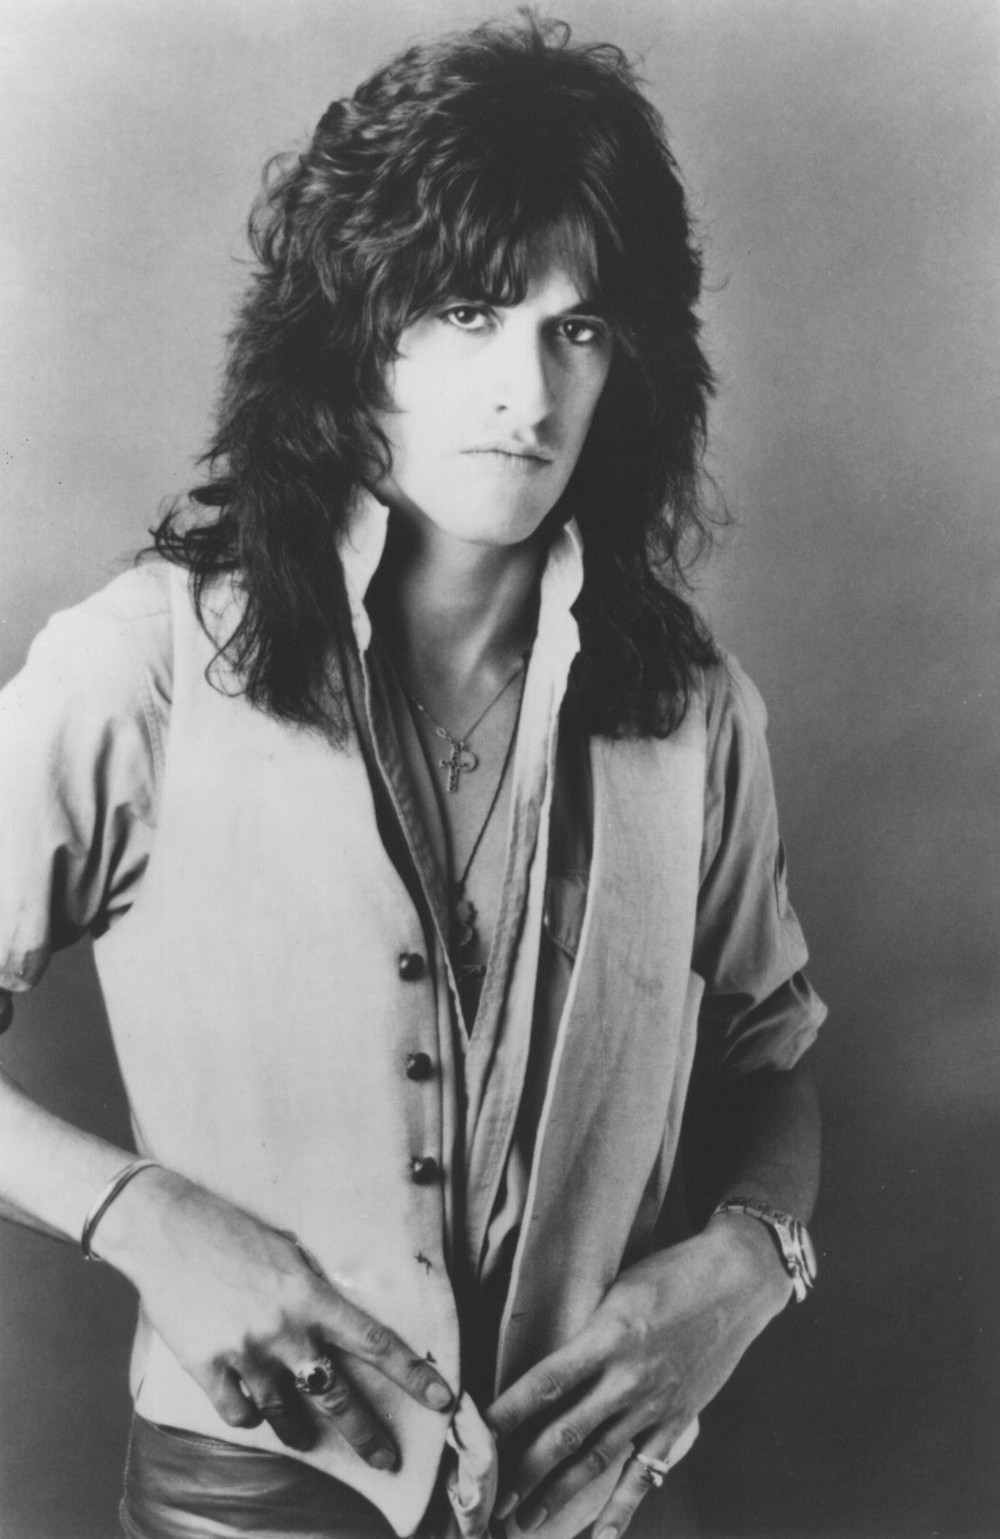 The Joe Perry Project